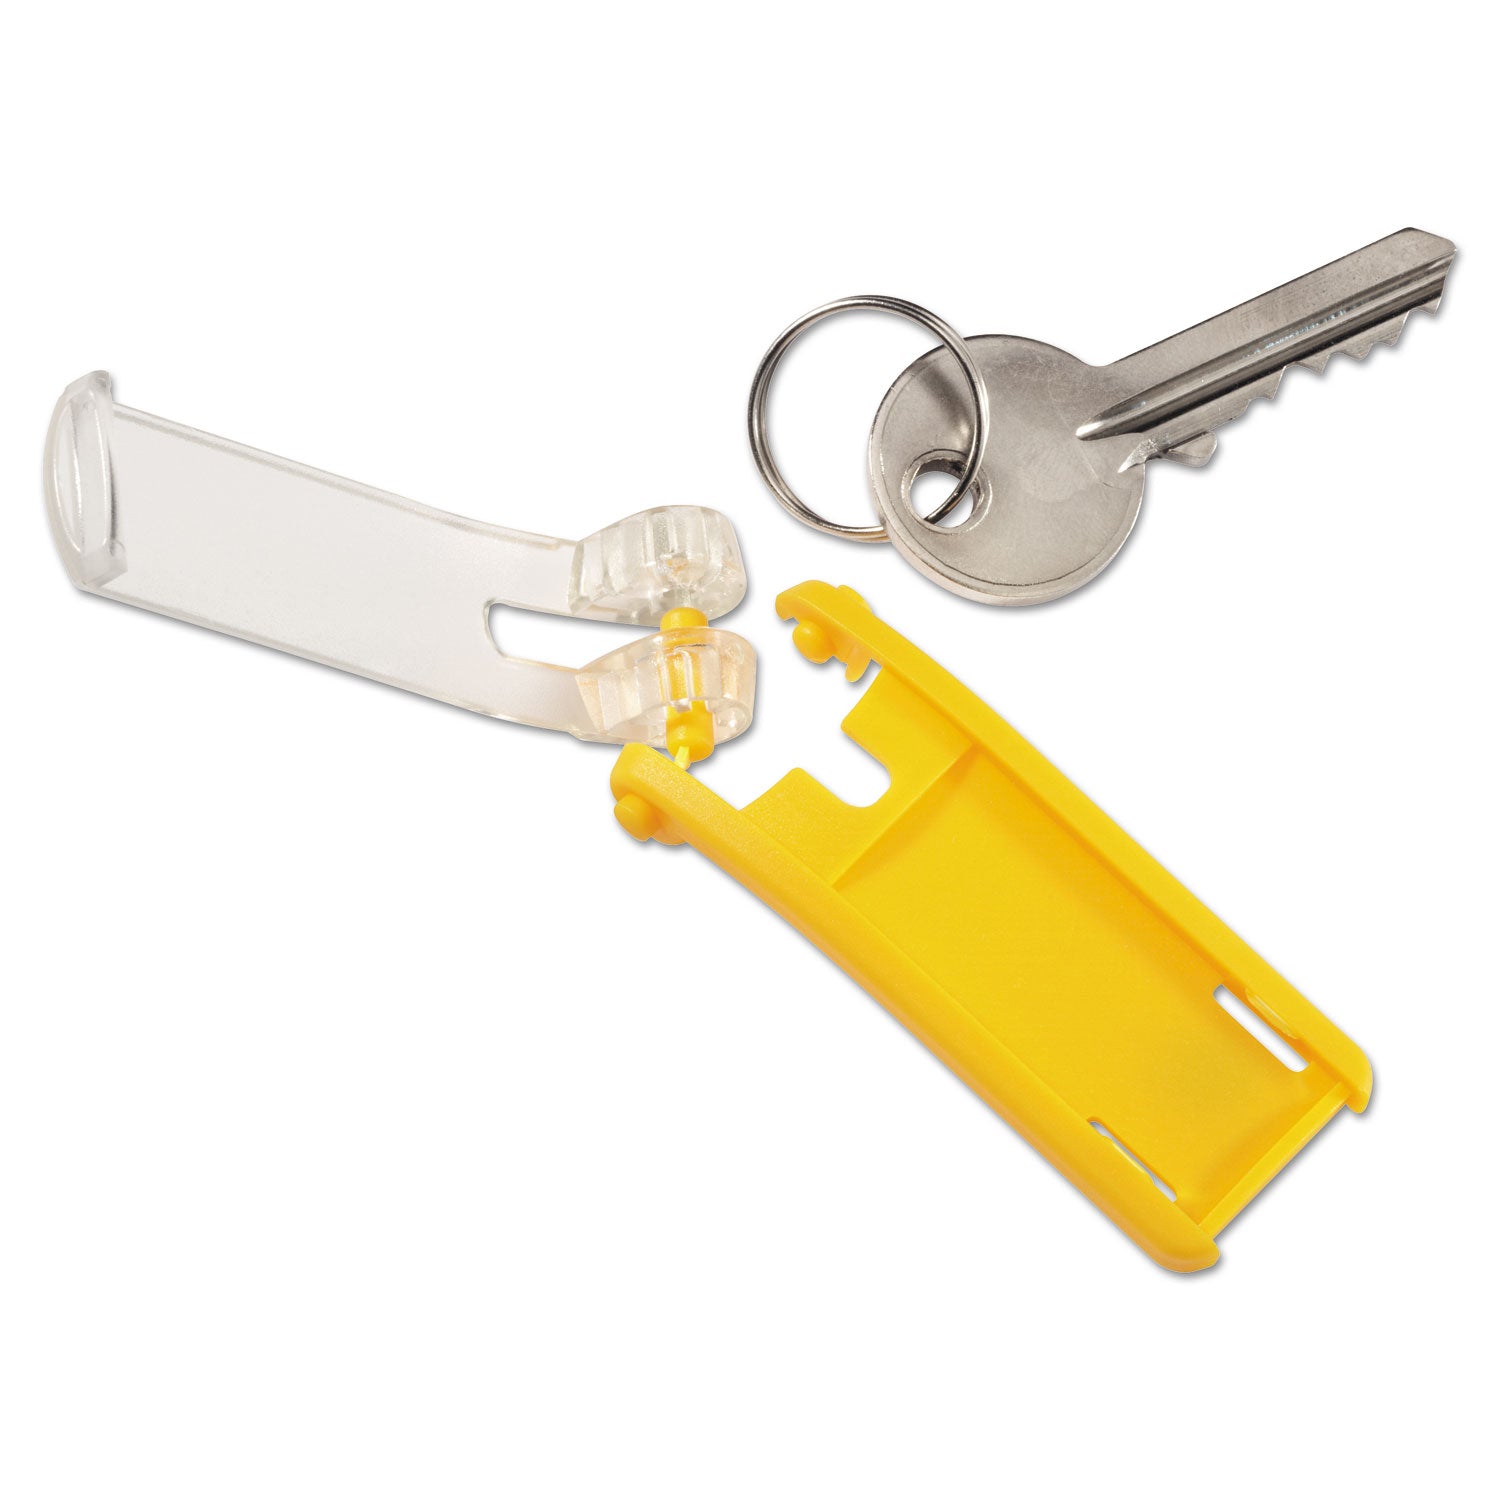 Key Tags for Locking Key Cabinets, Plastic, 1.13 x 2.75, Assorted, 24/Pack - 